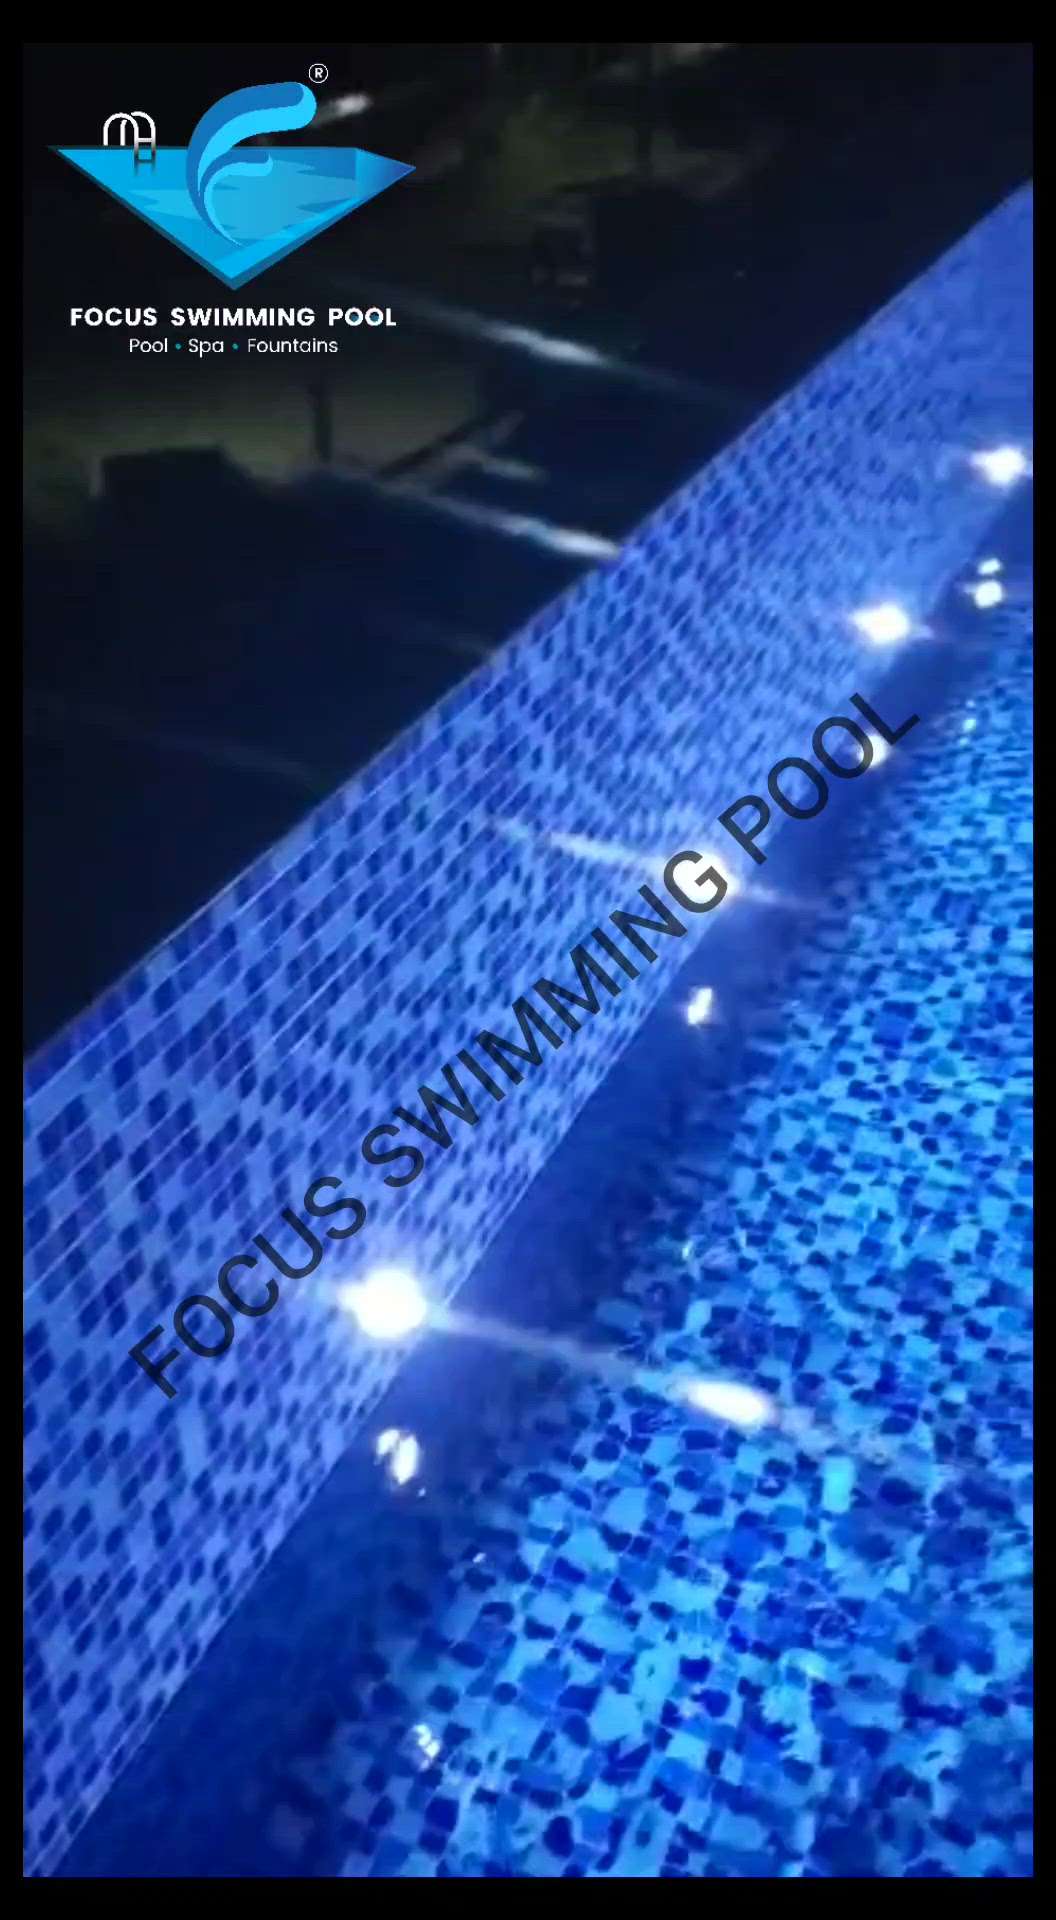 Testing and commissioning done at Thirumayam, puthukottai, Tamilnadu... ROOF TOP skimmer pool of size 3 x 8 Mt's
 Designed and Executed by Our Tamilnadu, Trichy branch. Thanks to our team

 #swimmingpoolbuilders #swimmingpoolconstructionconpany #swimmingpoolequipmentsupply #swimmingpoolcontractor@tamilnadu #swimmingpoolcontractorkerala #pooldesigner